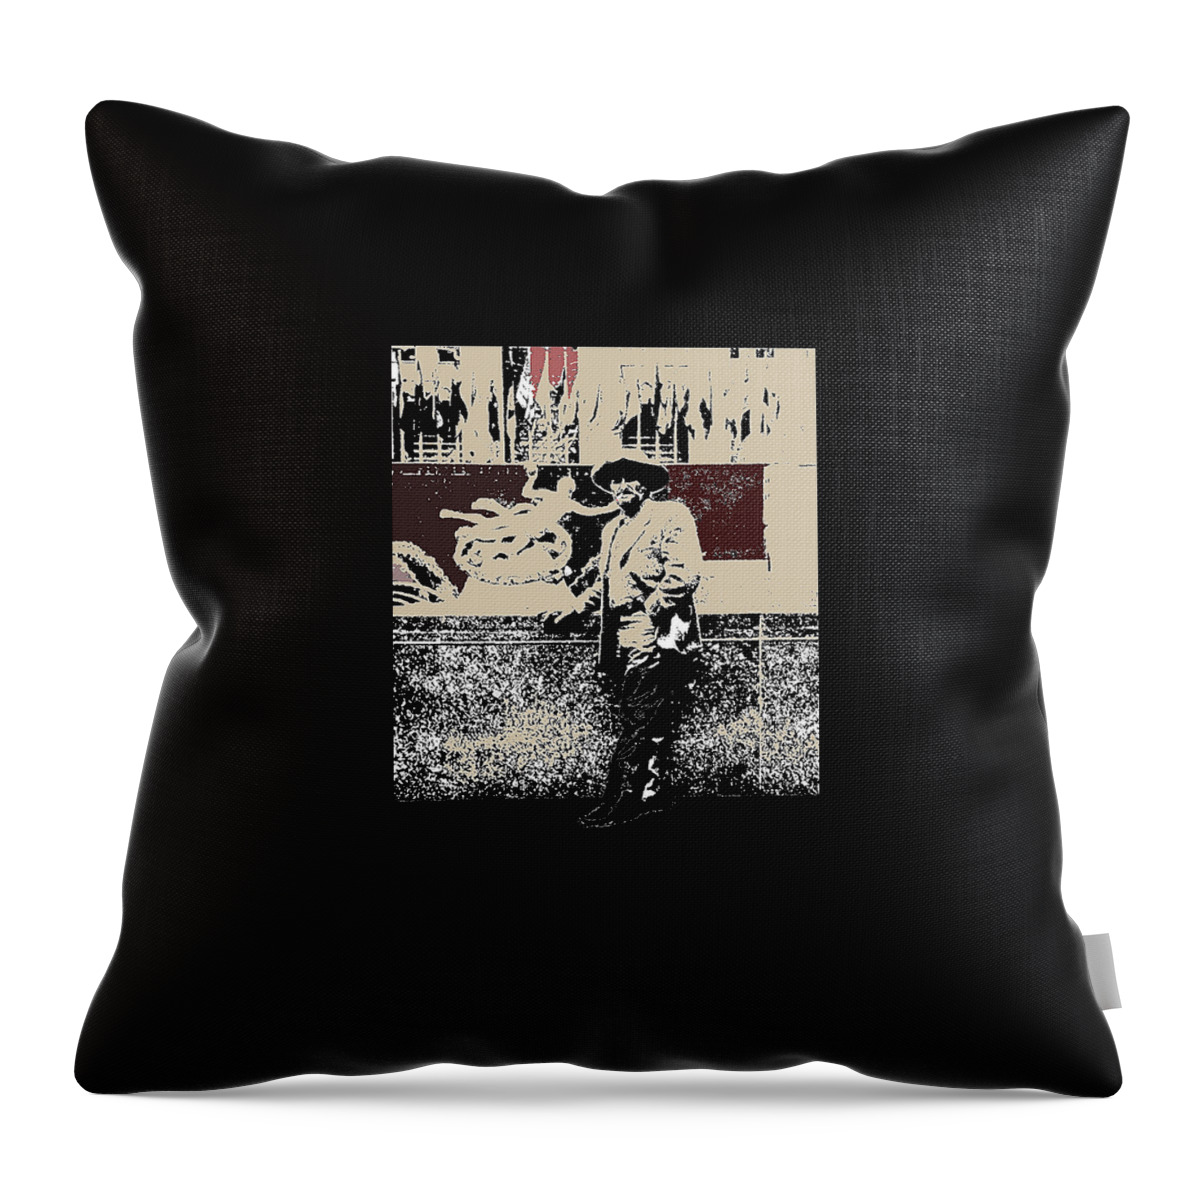 Ted Degrazia Nbc New York City Thomas Galvin Photo 1960-2013 Throw Pillow featuring the photograph Ted DeGrazia 30 Rockeller Plaza NBC New York City Thomas Galvin Photo 1960-2013 by David Lee Guss